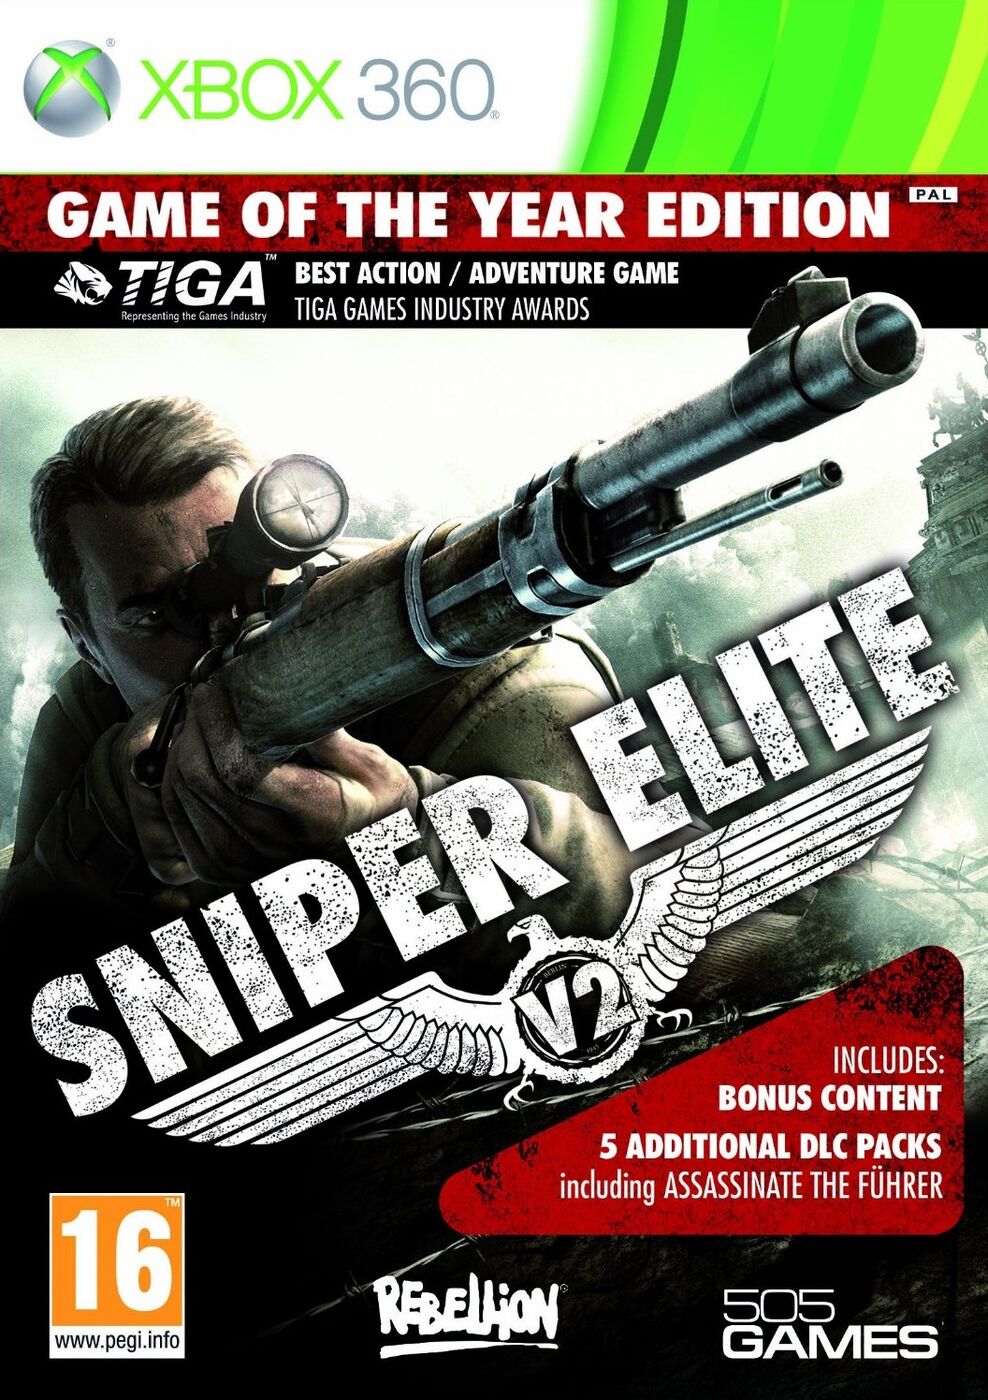 Sniper Elite V2: Game of the Year Edition PS3. - Free ...